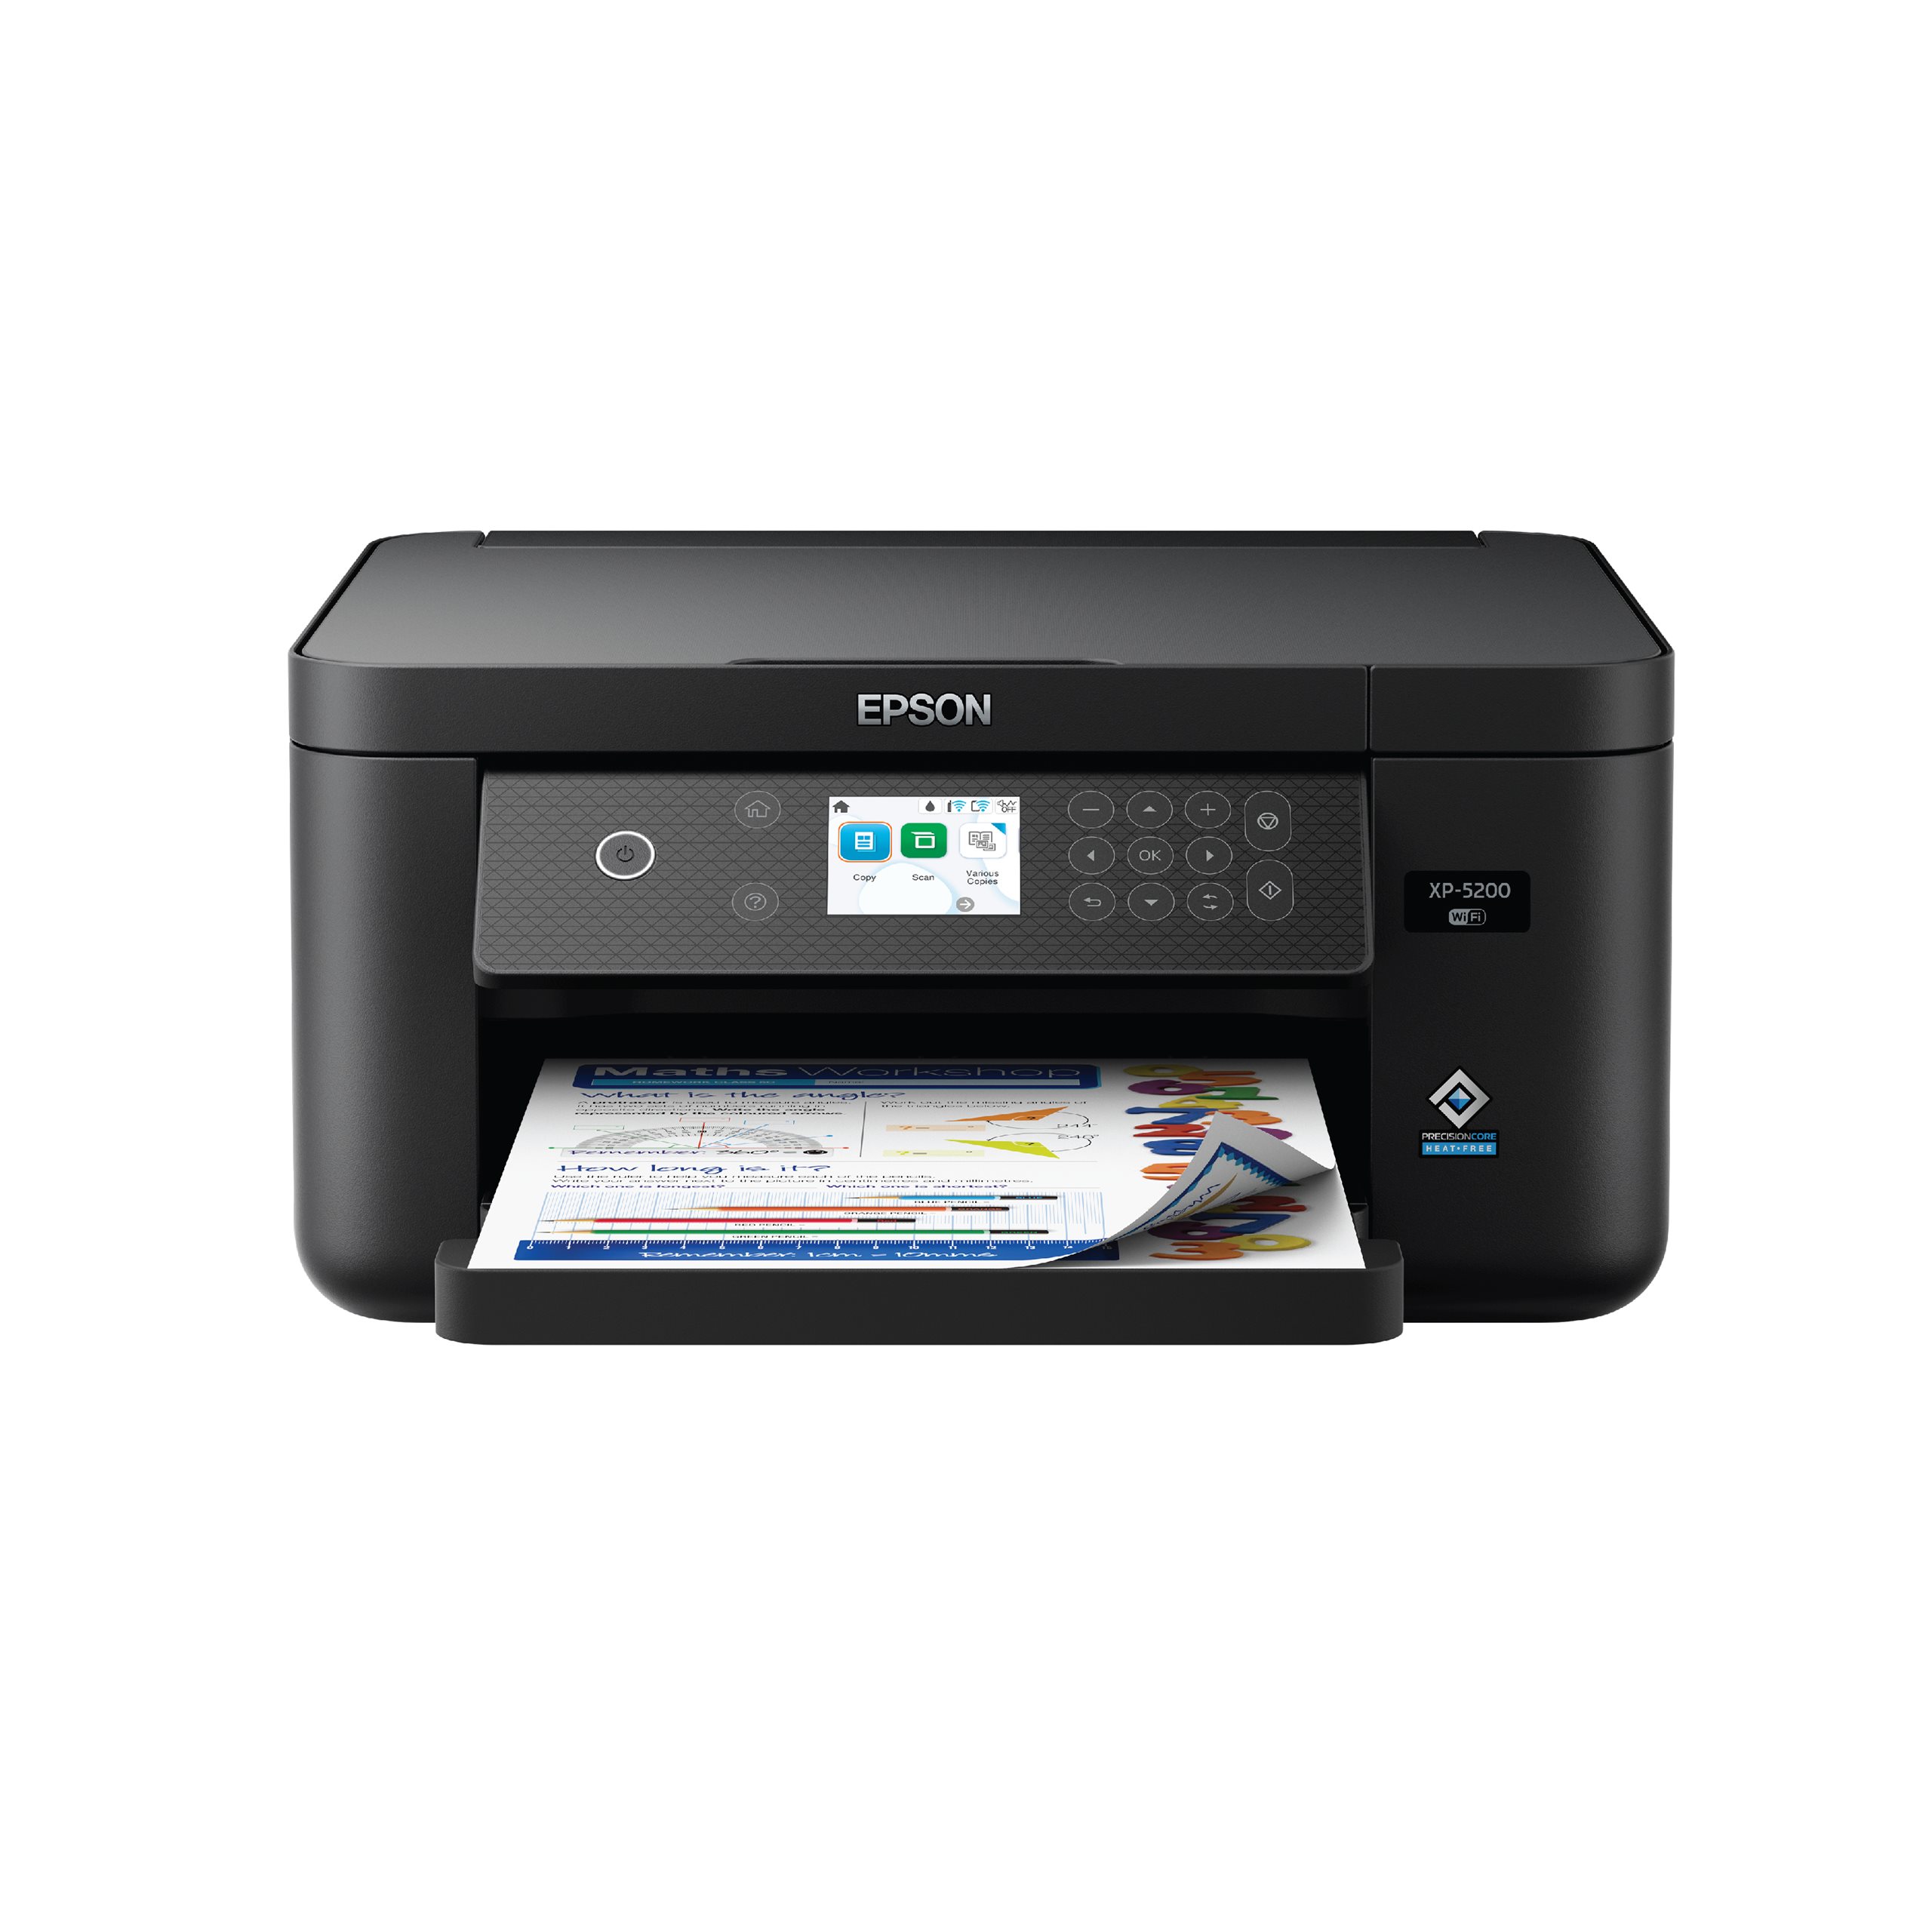 Epson Home XP-5200 Wireless Color Inkjet All-in-One Printer with Scan and Copy | Dell USA